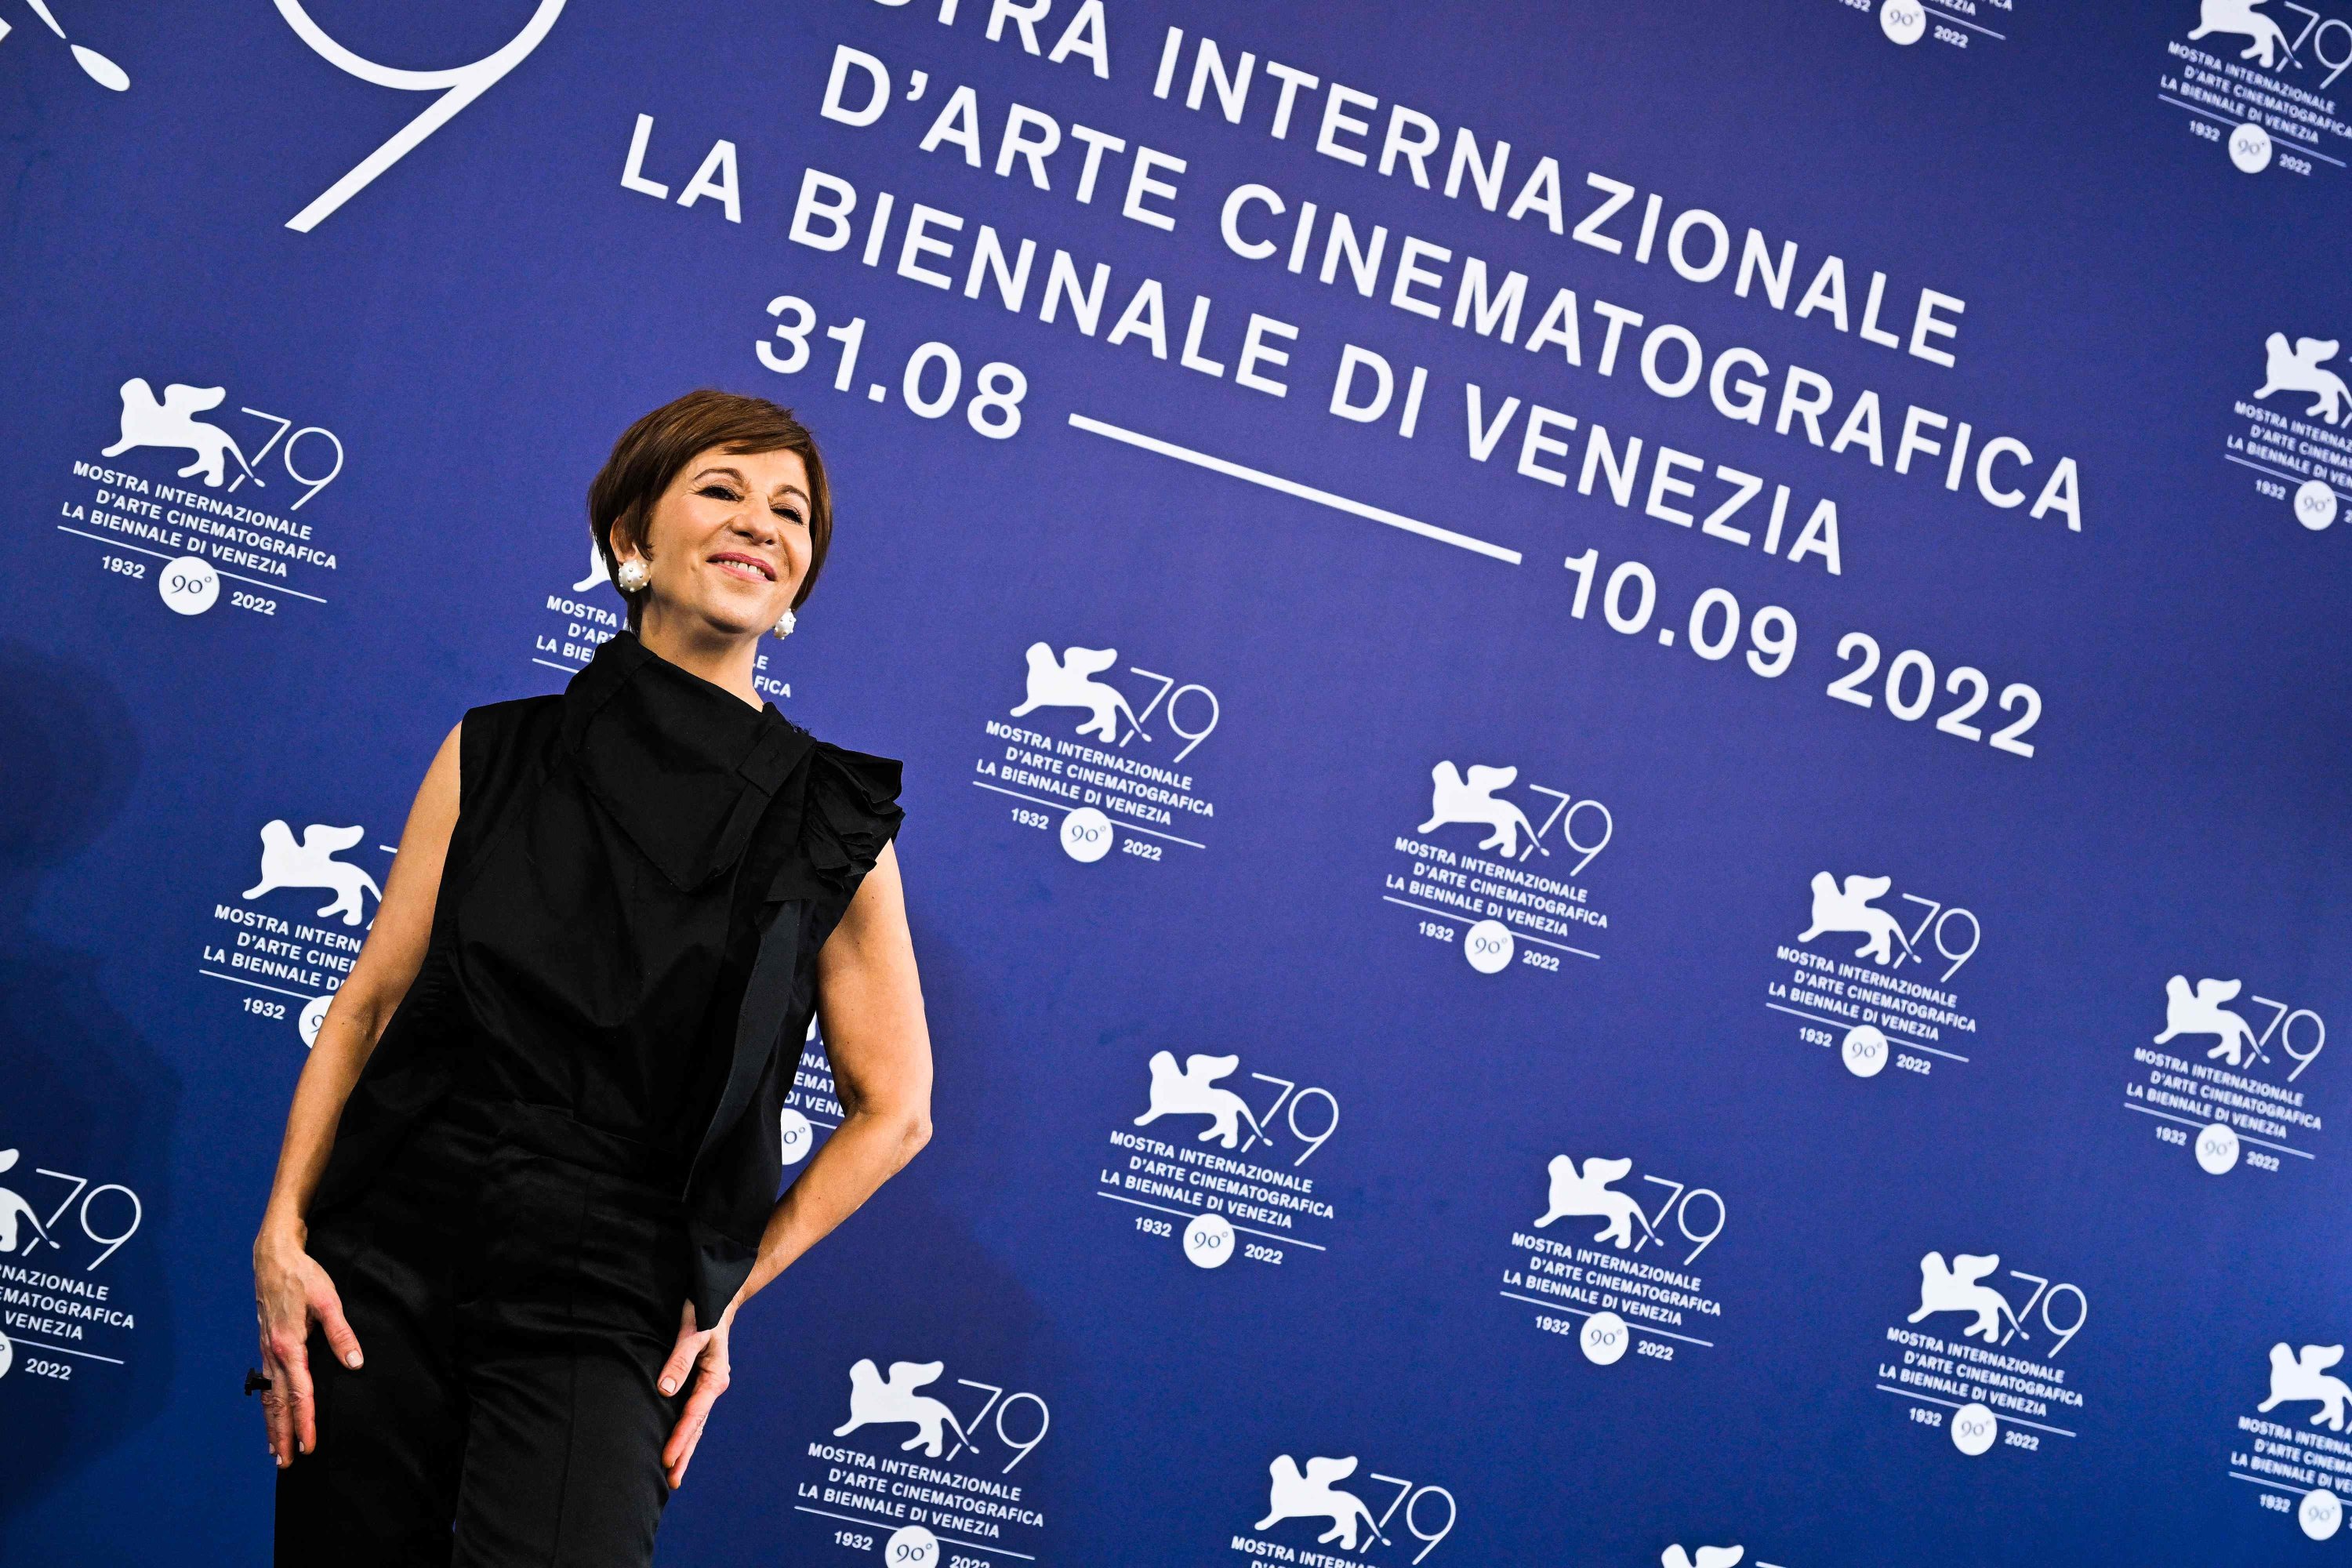 Argentine actress Alejandra Flechner poses on Sept. 3, 2022, during a photocall for the film "Argentina, 1985" presented in the Venezia 79 competition as part of the 79th Venice International Film Festival at Lido di Venezia in Venice, Italy. (AFP Photo)